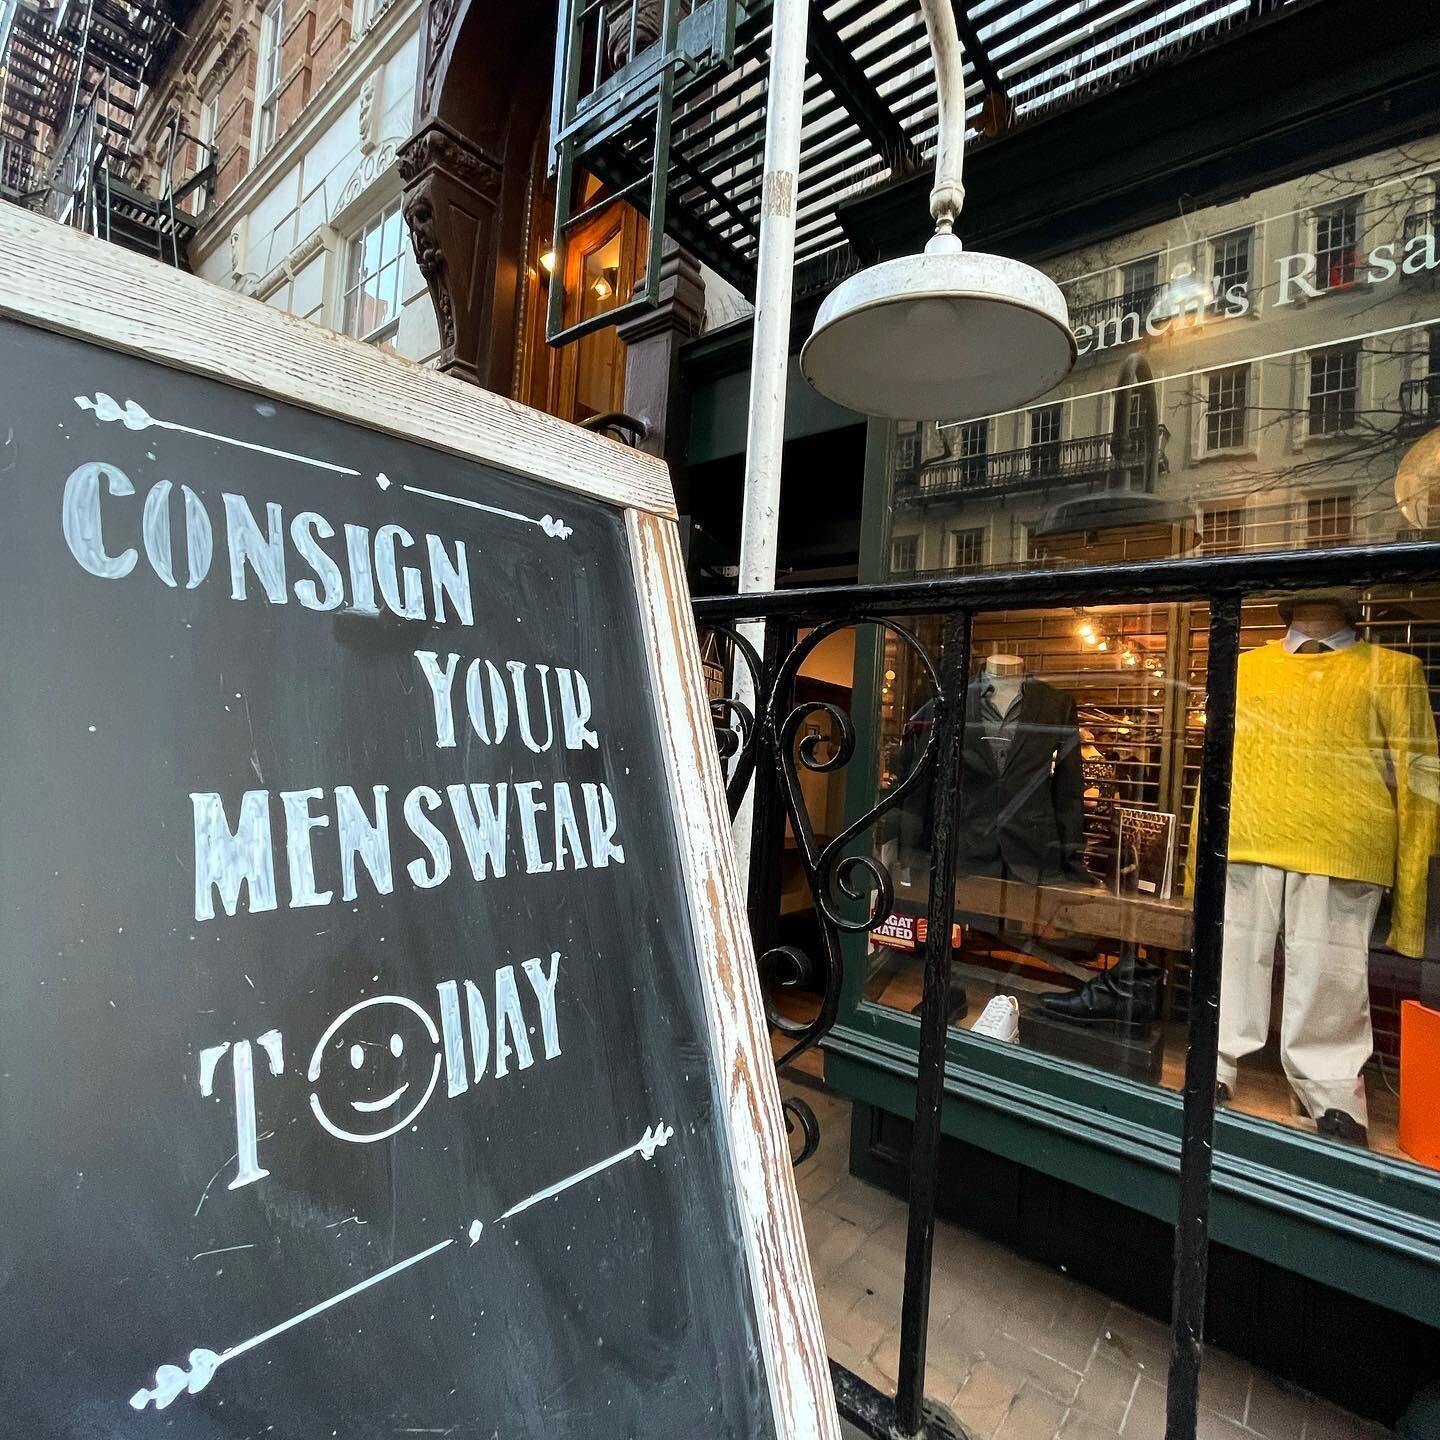 Consign Your Menswear Today !